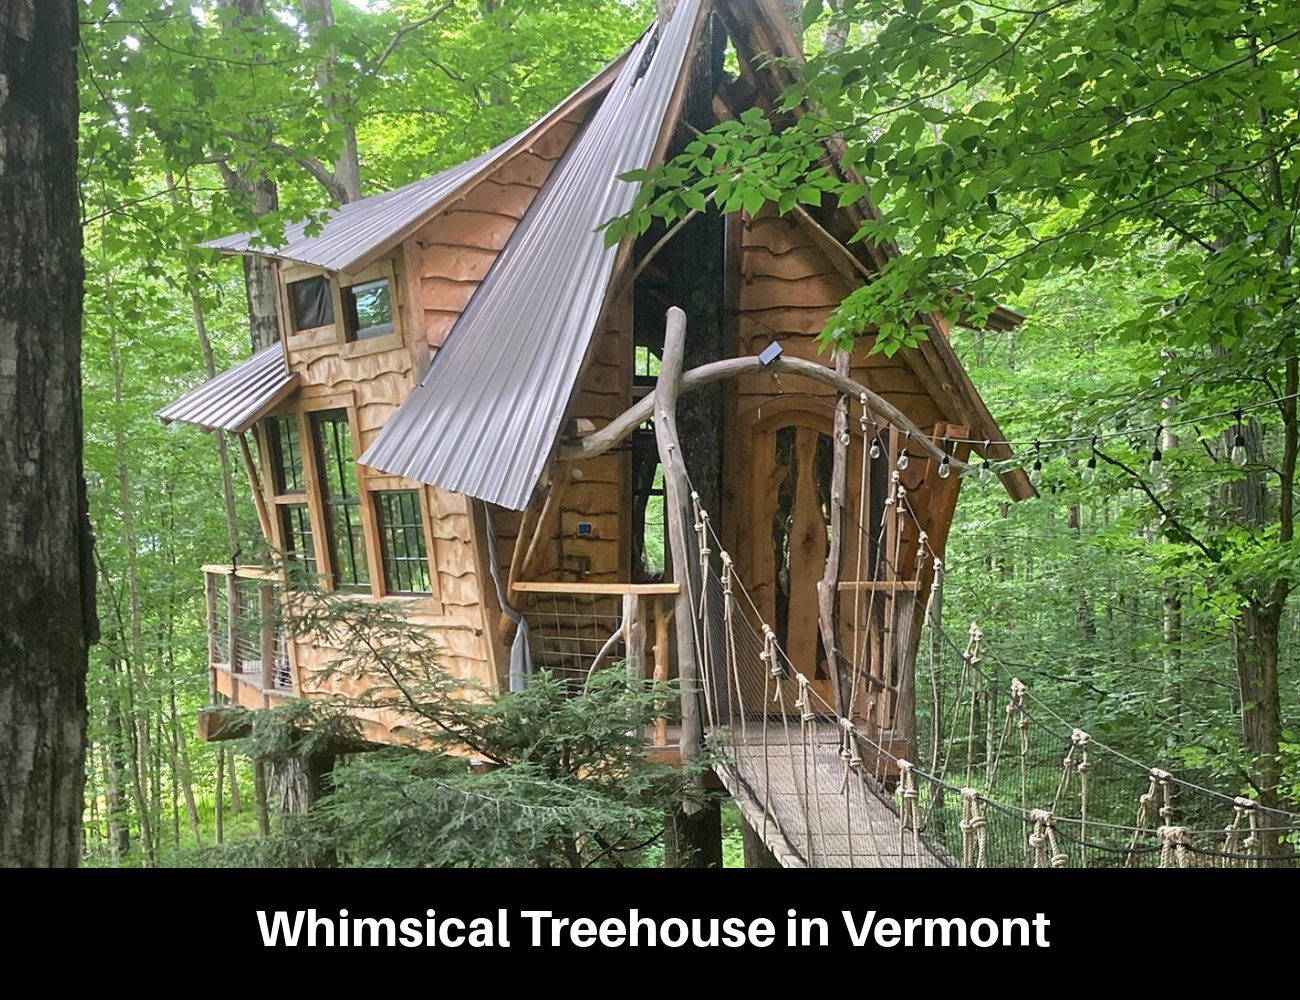 Whimsical Treehouse in Vermont